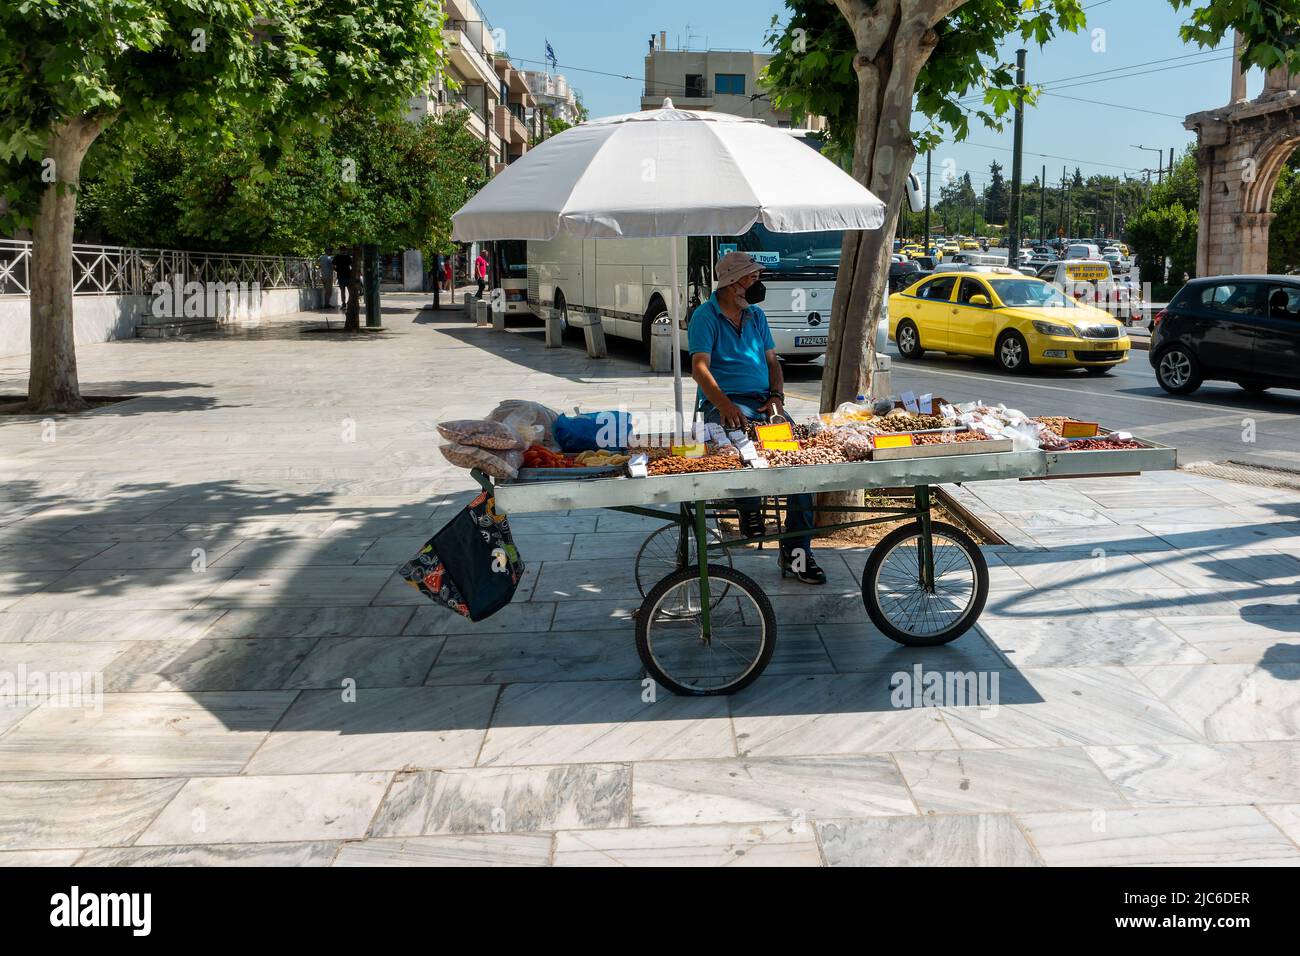 A fruit and fresh produce seller in Athens, Greece Stock Photo